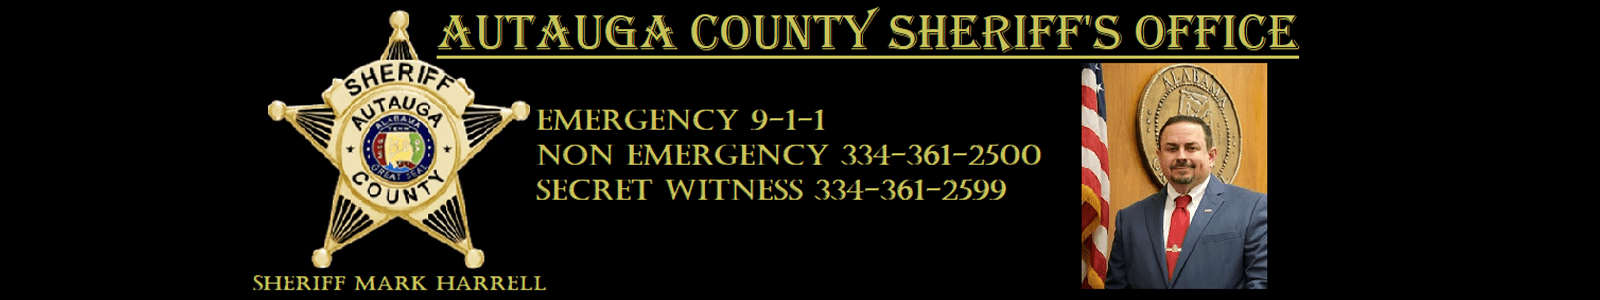 Autauga County Sheriff's Office banner showing phone numbers available on the website.